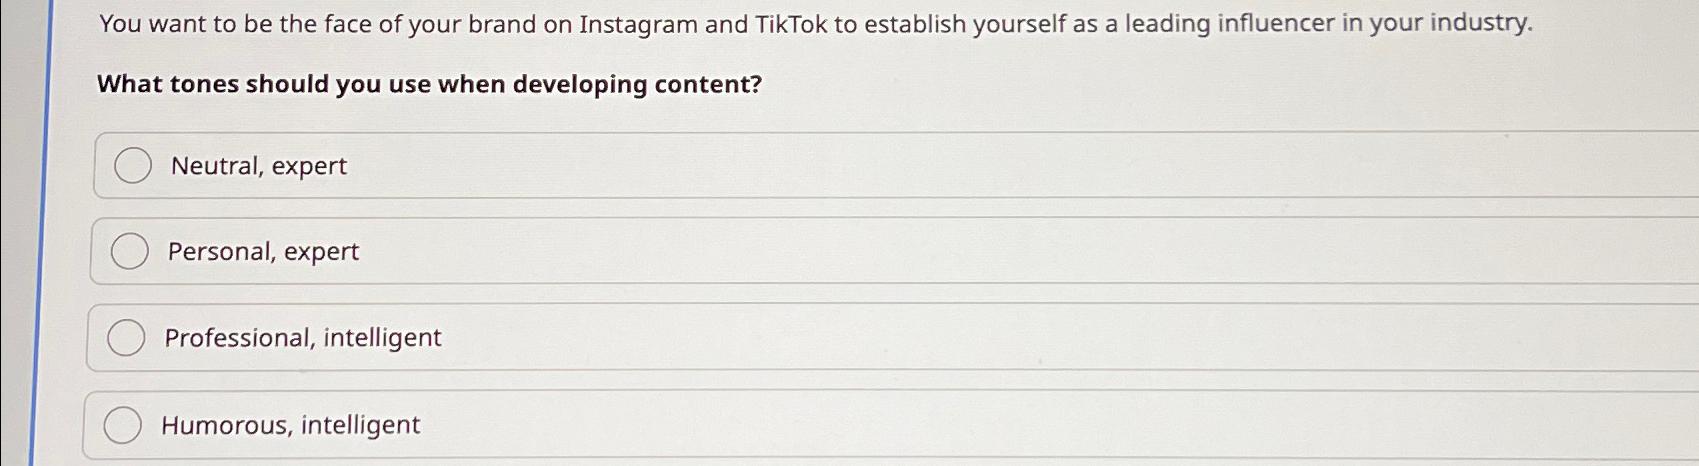 You want to be the face of your brand on Instagram and TikTok to establish yourself as a leading influencer